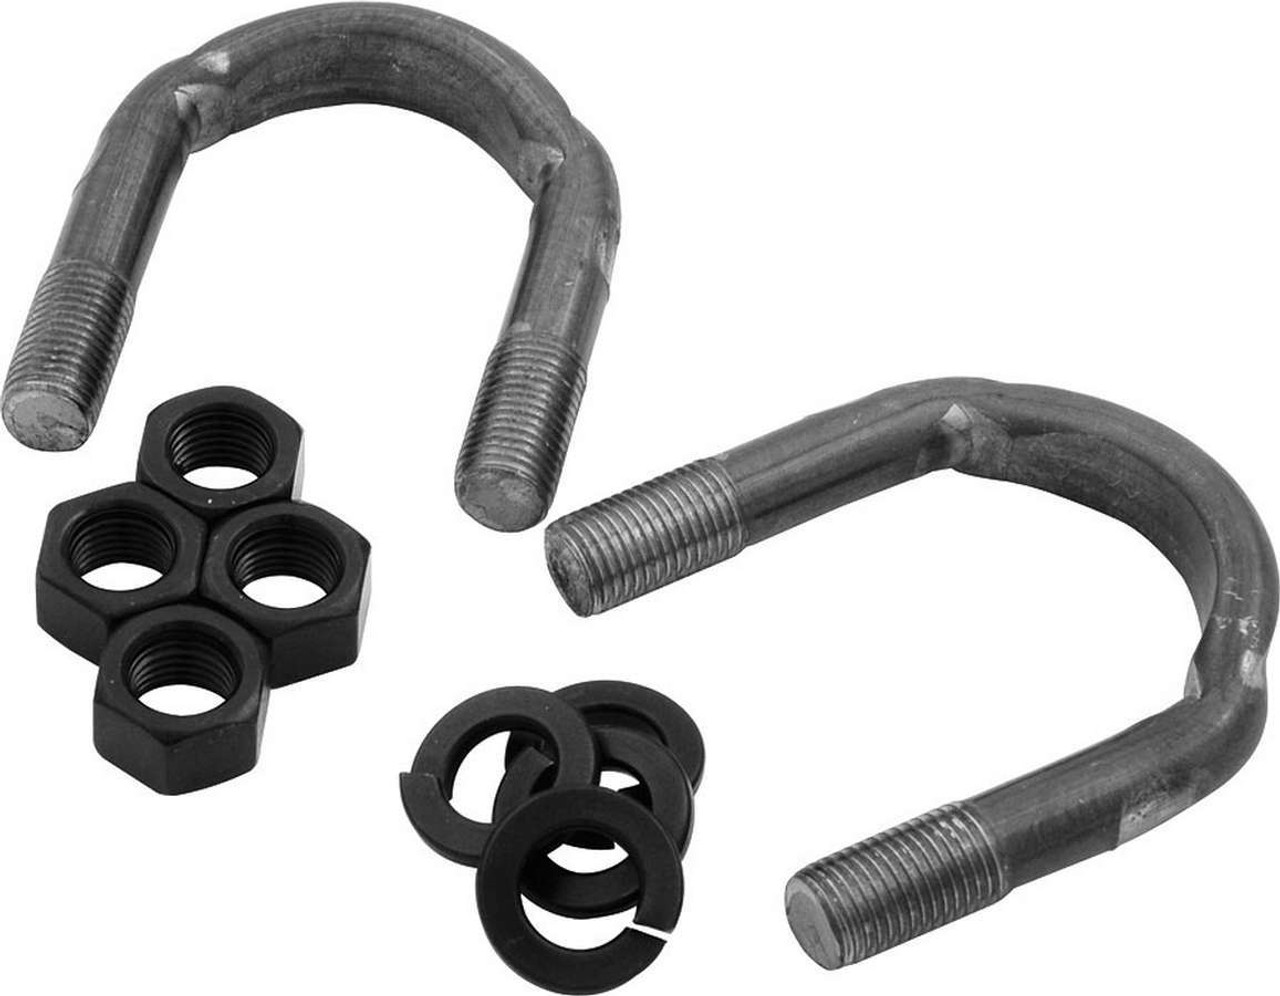 THIS KIT CONTAINS TWO U-BOLTS, LOCK WASHERS AND NUTS. ENOUGH PIECES FOR ONE YOKE. These u-bolts fit 1-3/16 caps.